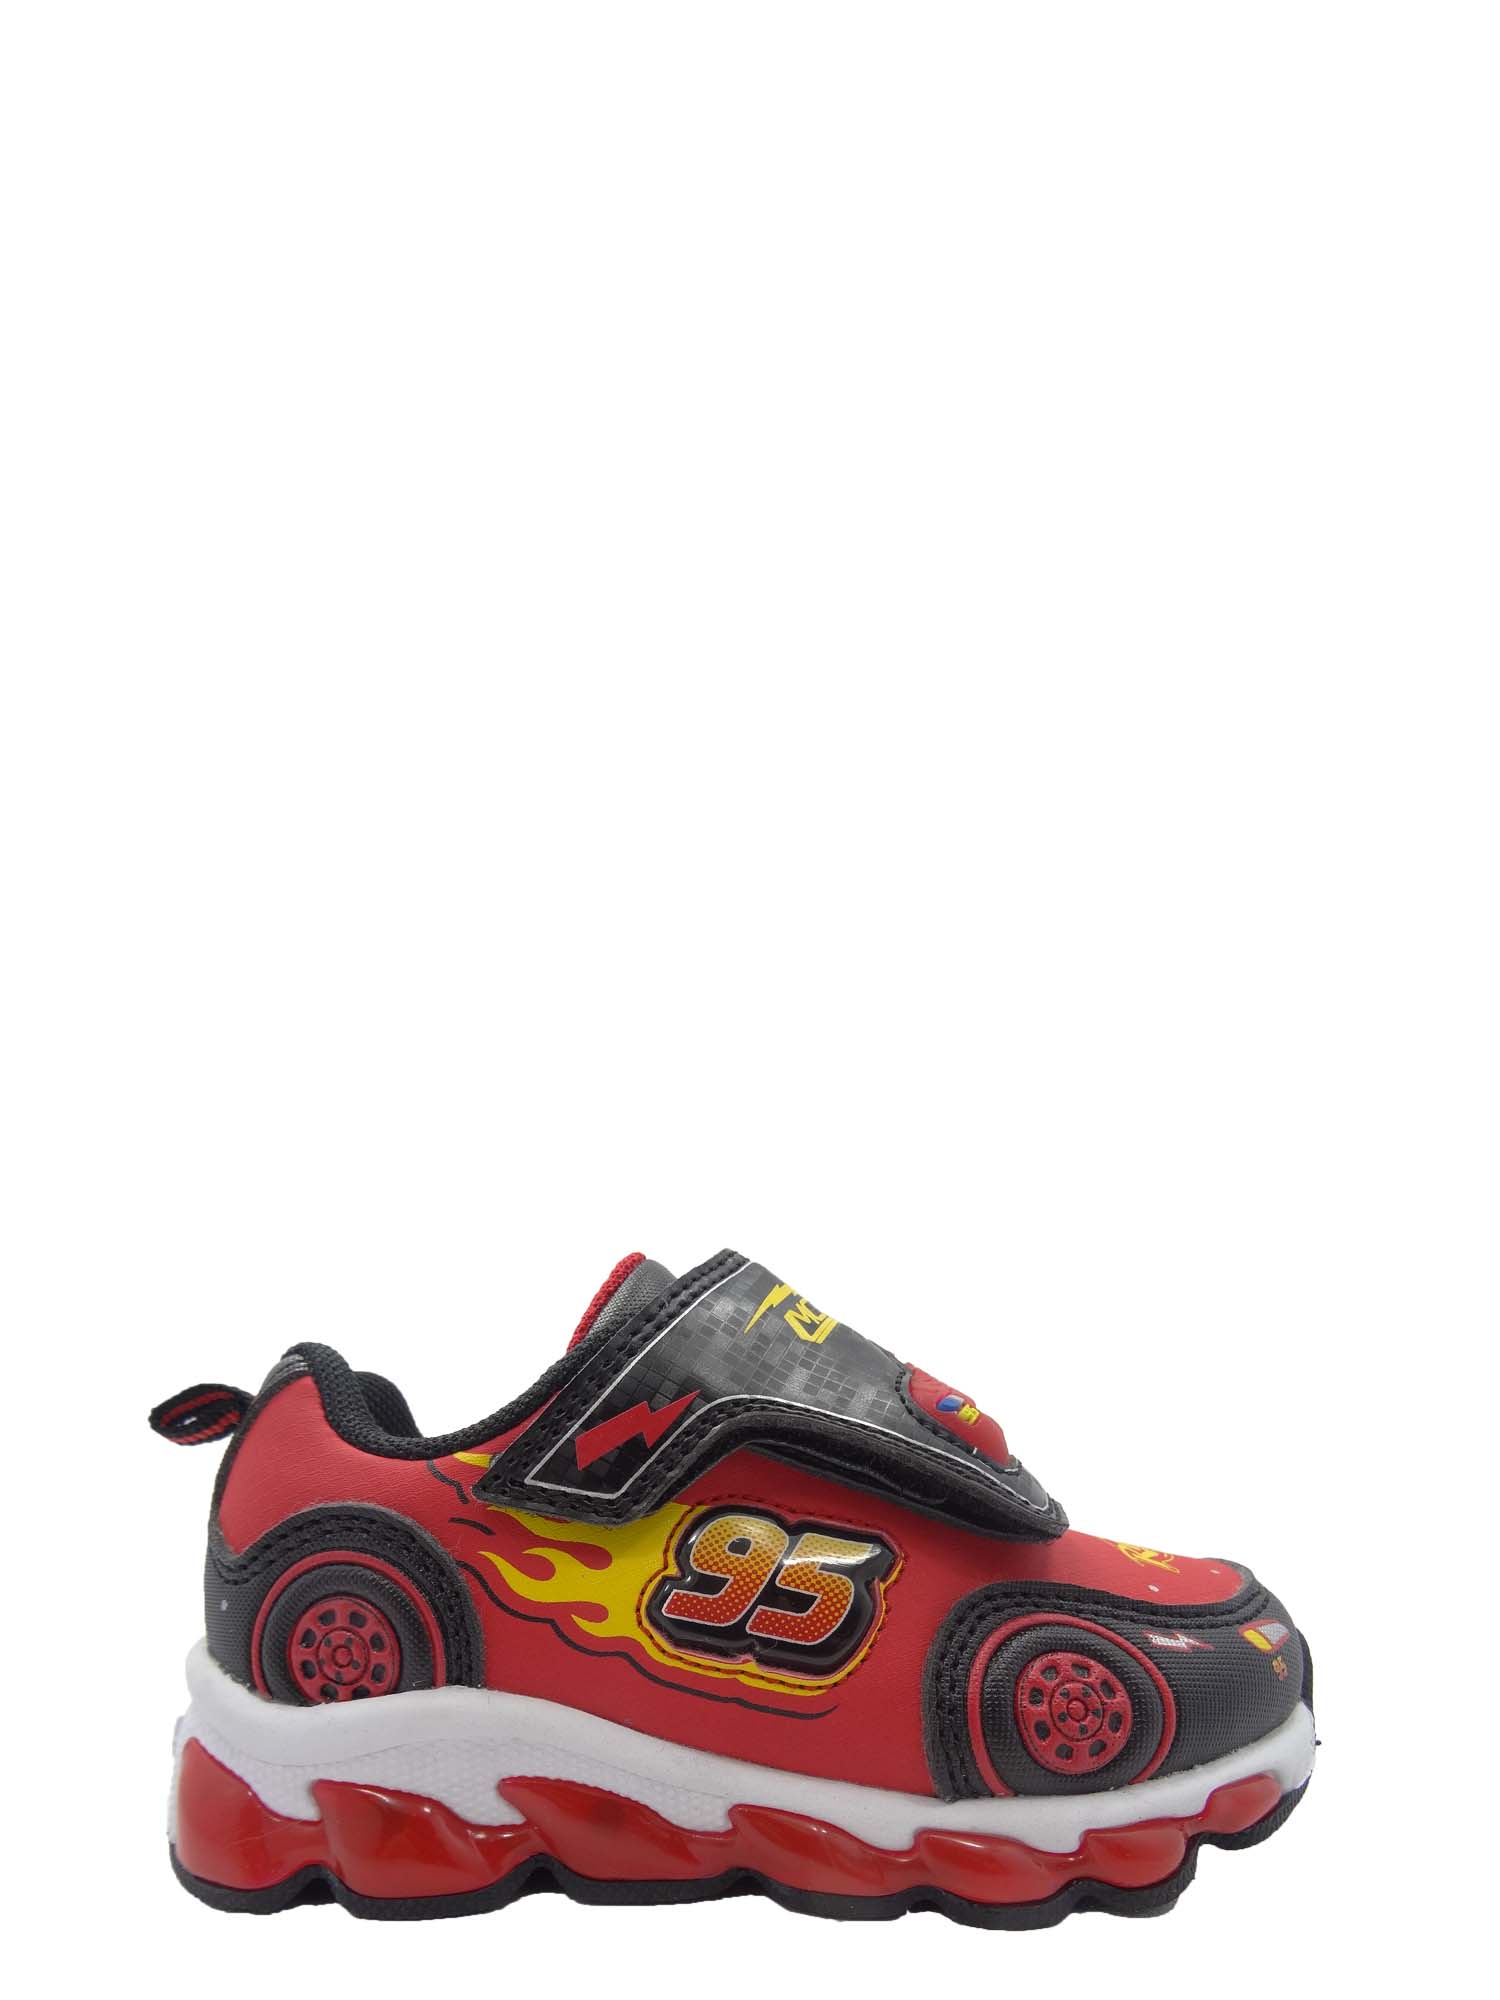 Cars Licensed Boys' Athletic Shoe - image 5 of 5